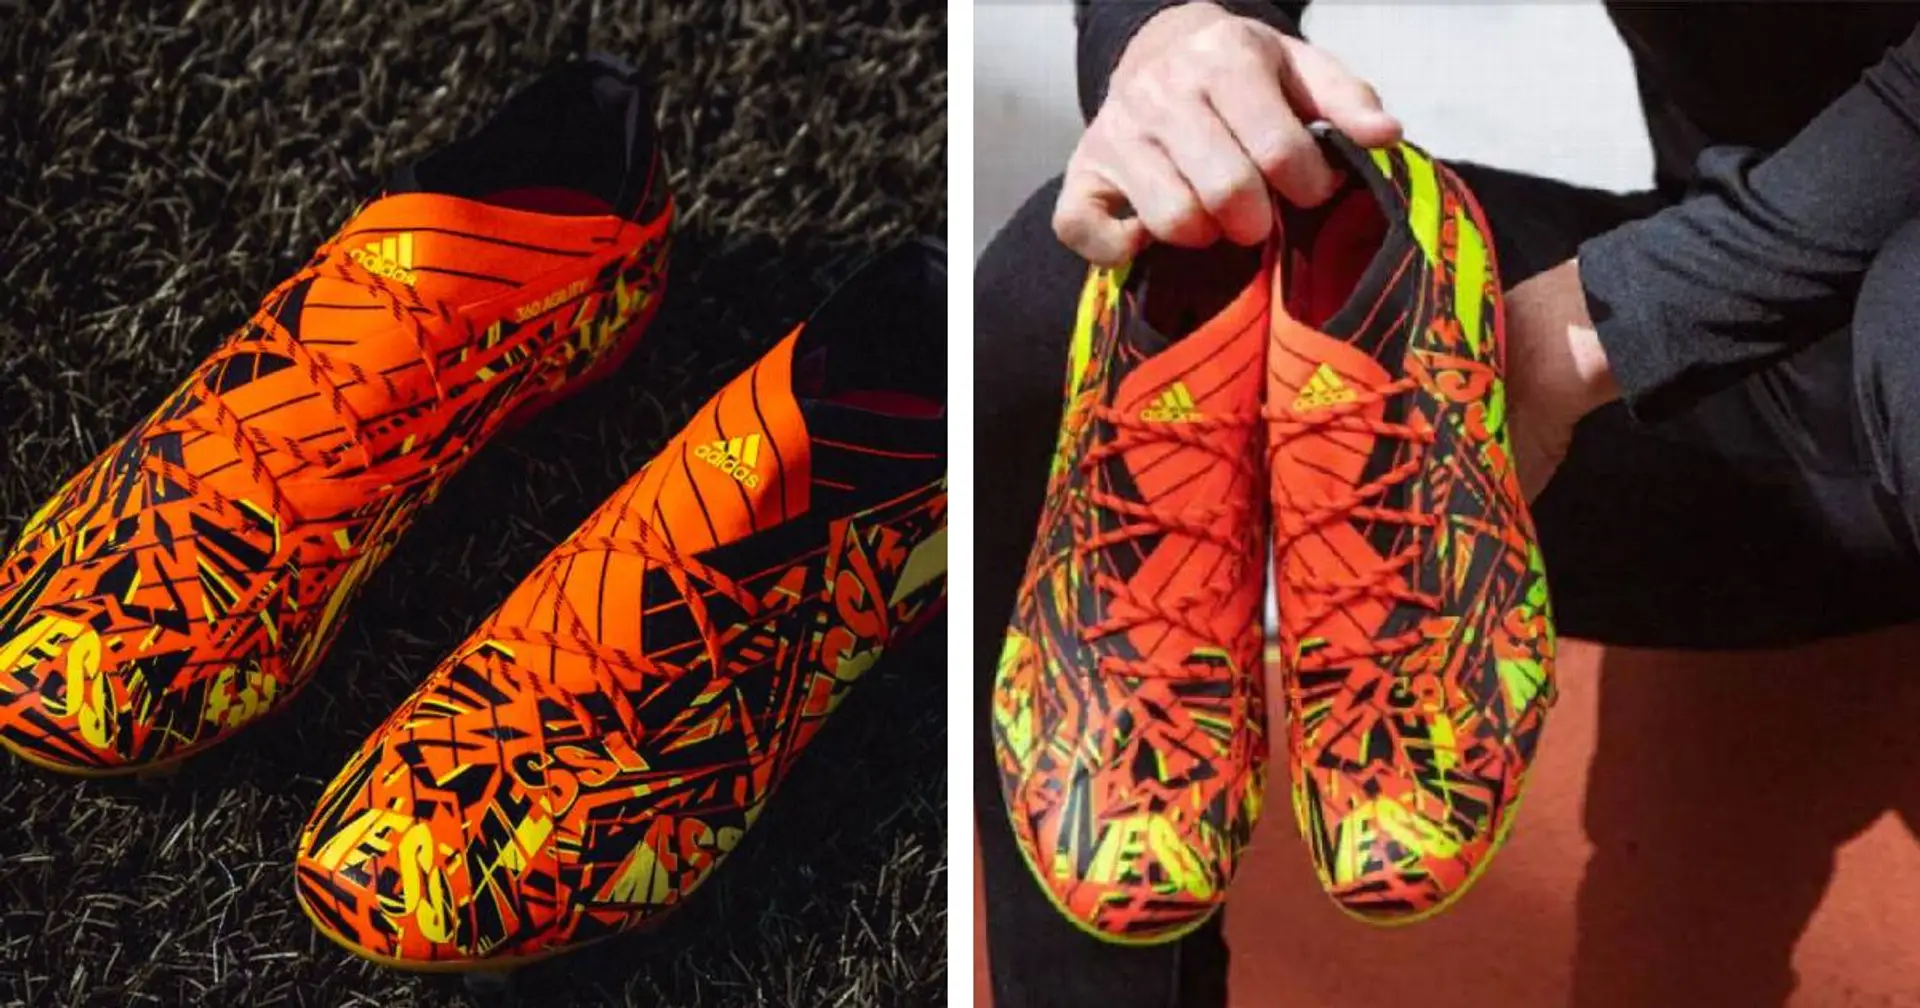 Adidas release majestic 'King of the Ball' boots to commemorate Messi's record-breaking season